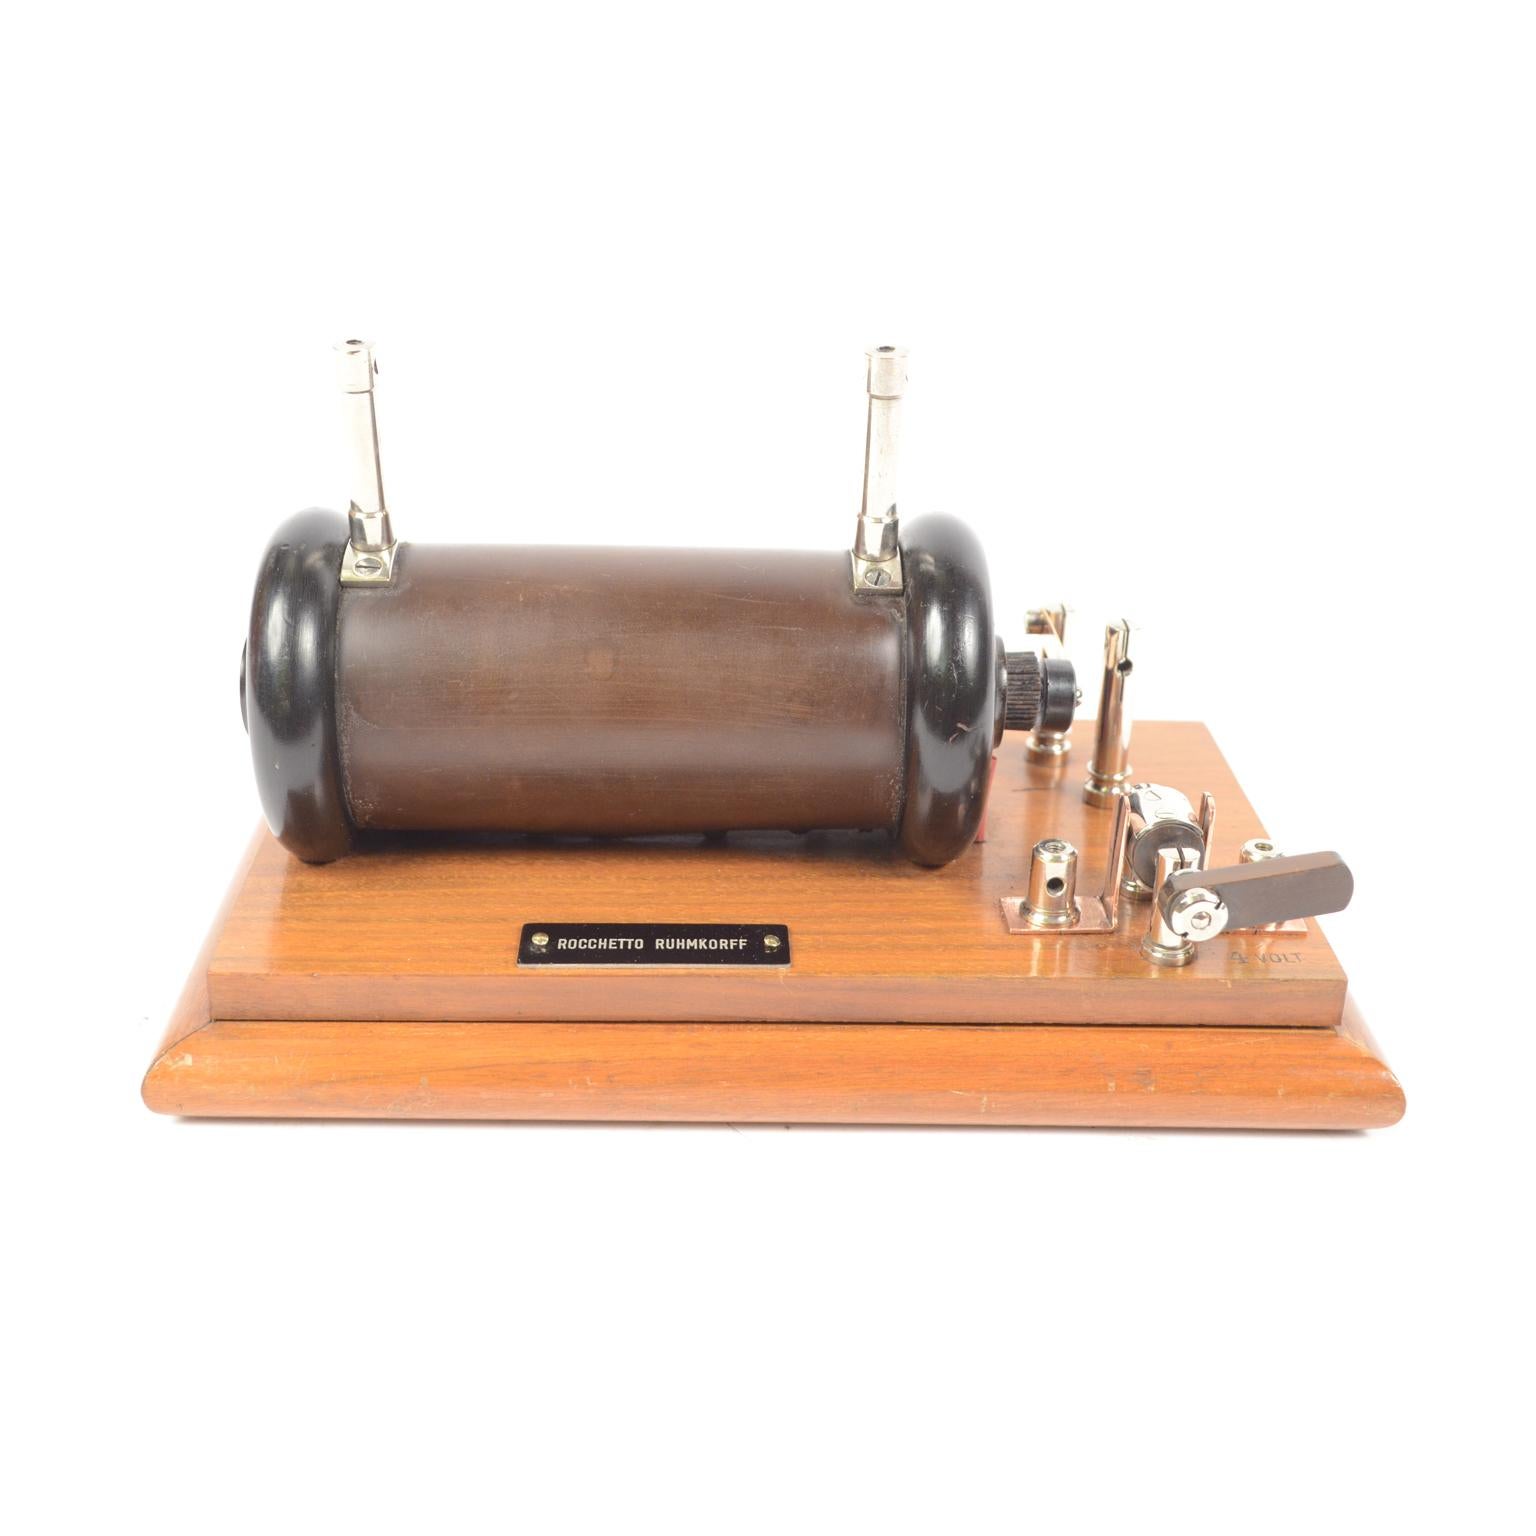 Antique nduction spool also called Ruhmkorff spool conceived circa mid-19th century, an instrument used to produce high voltage electric discharges starting from a low voltage direct current. Mounted on a walnut board. The induction spools were used